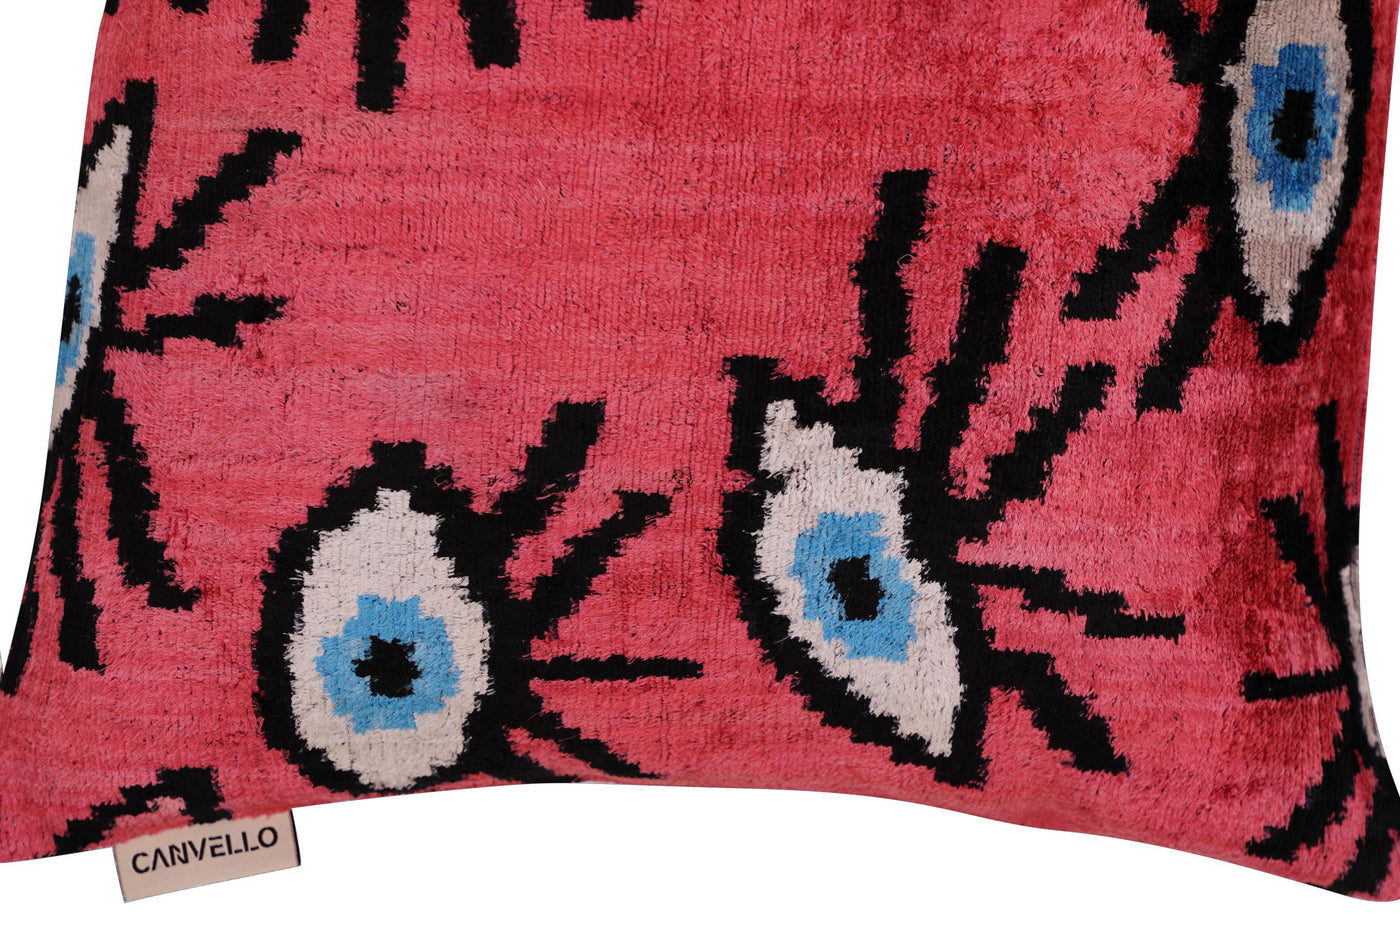 Canvello Luxury Pinkish Red Evil Eye Pillow for Couch - 16x16 inch